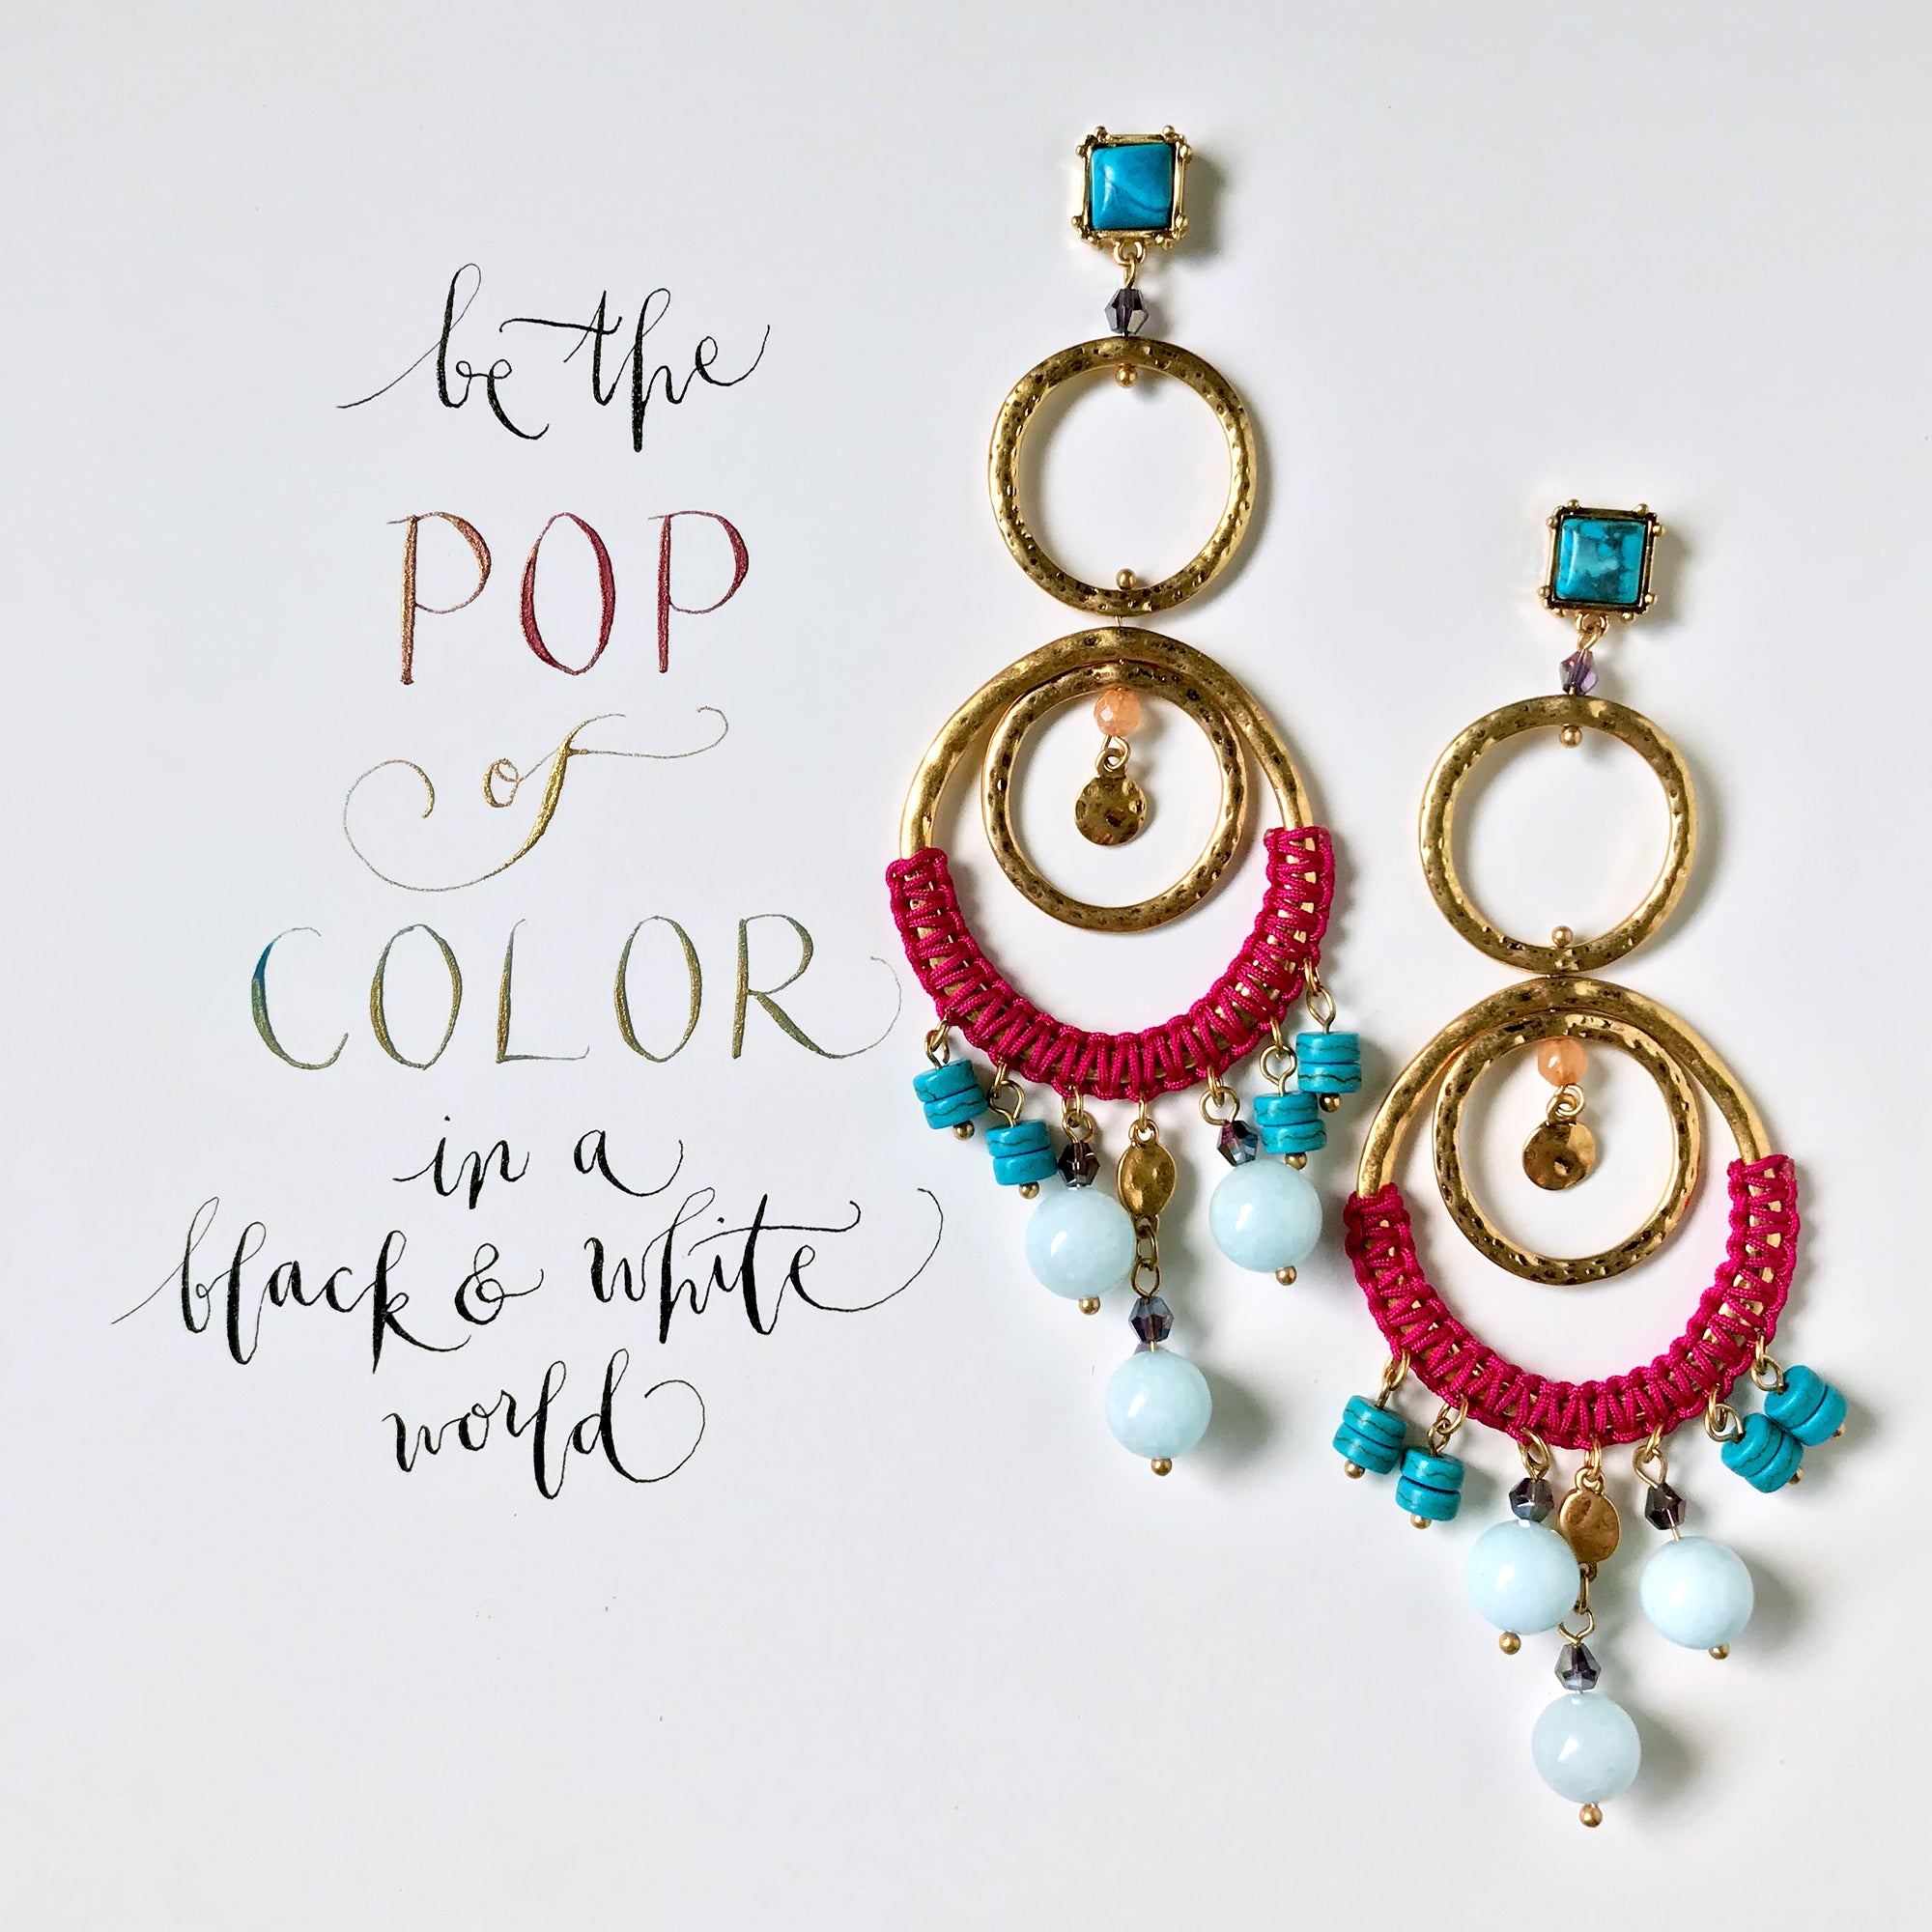 #SequinSayings - Be the Pop of Color...